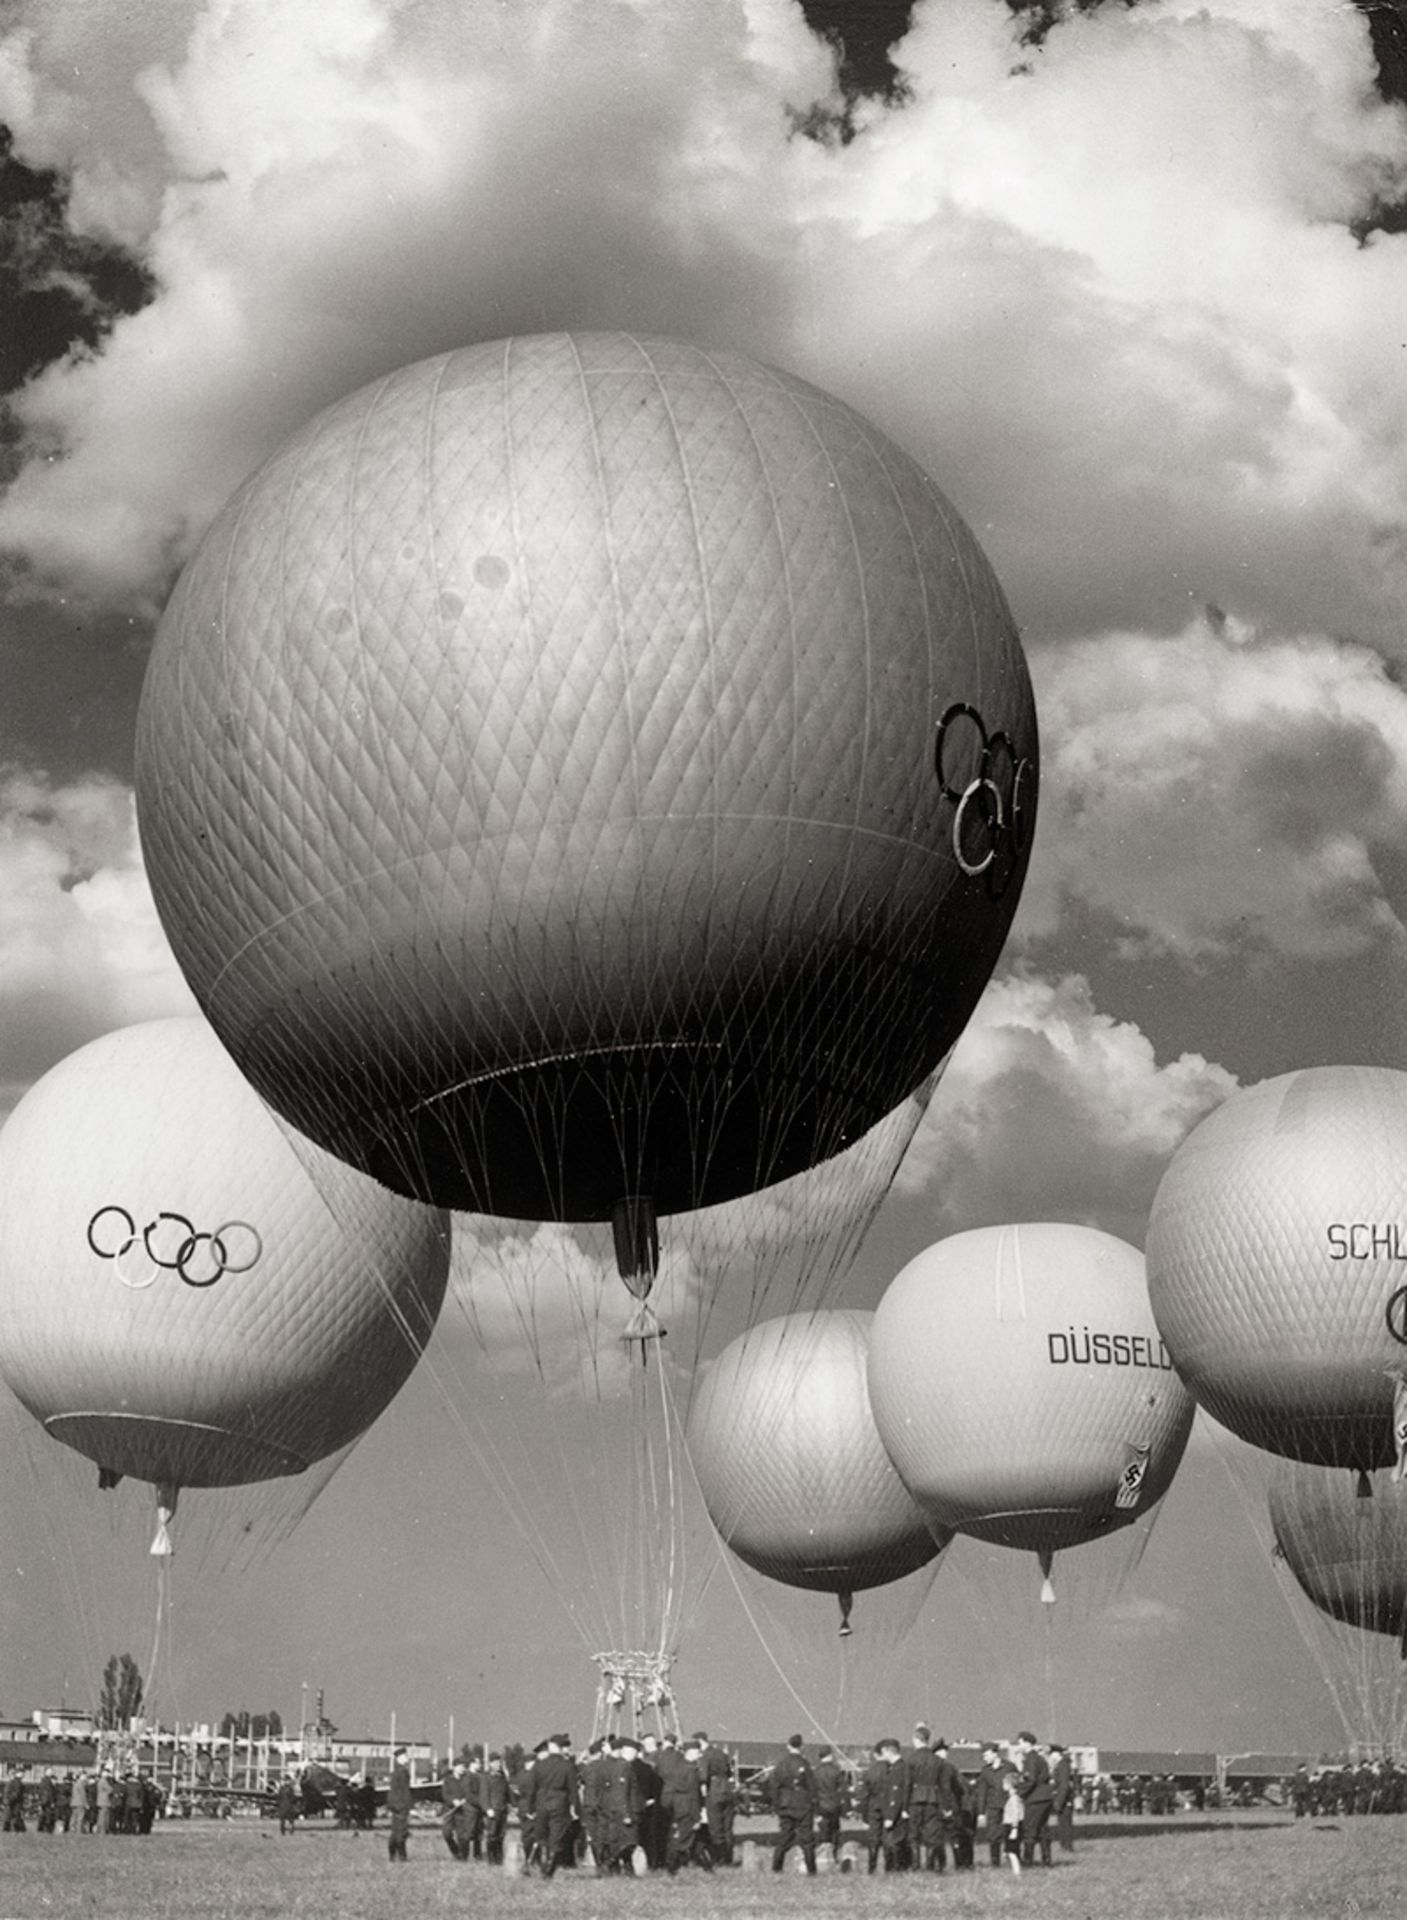 Stöcker, Alex: Great Balloon show on occasion Olympic Games